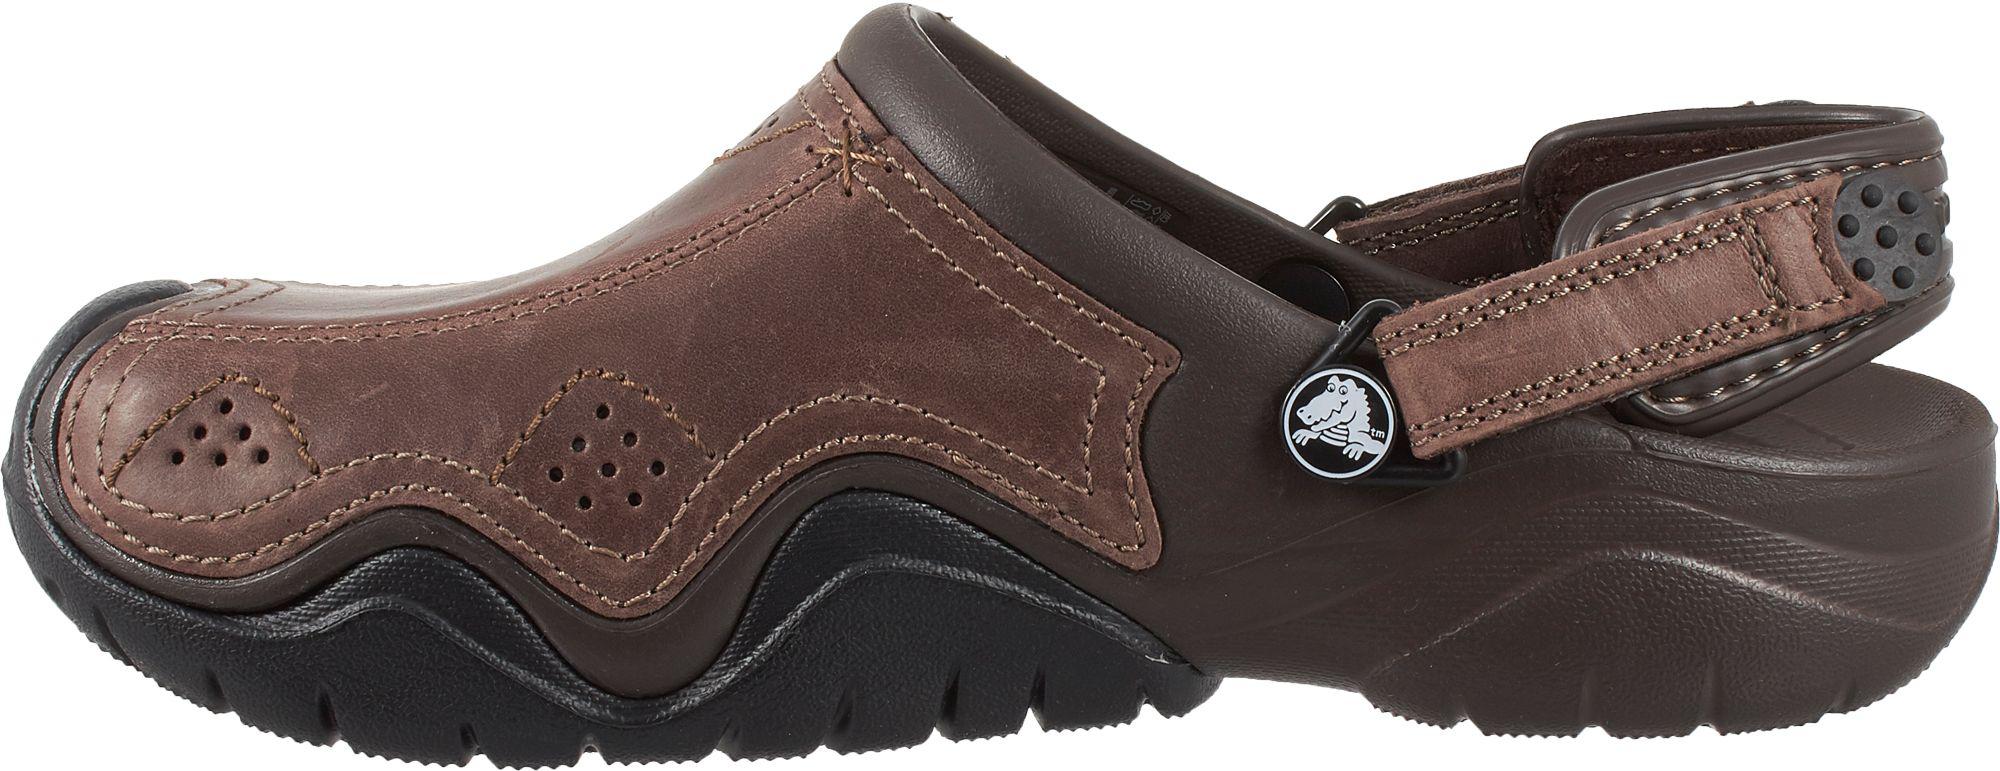 Crocs™ Swiftwater Leather Clogs in Brown for Men - Lyst